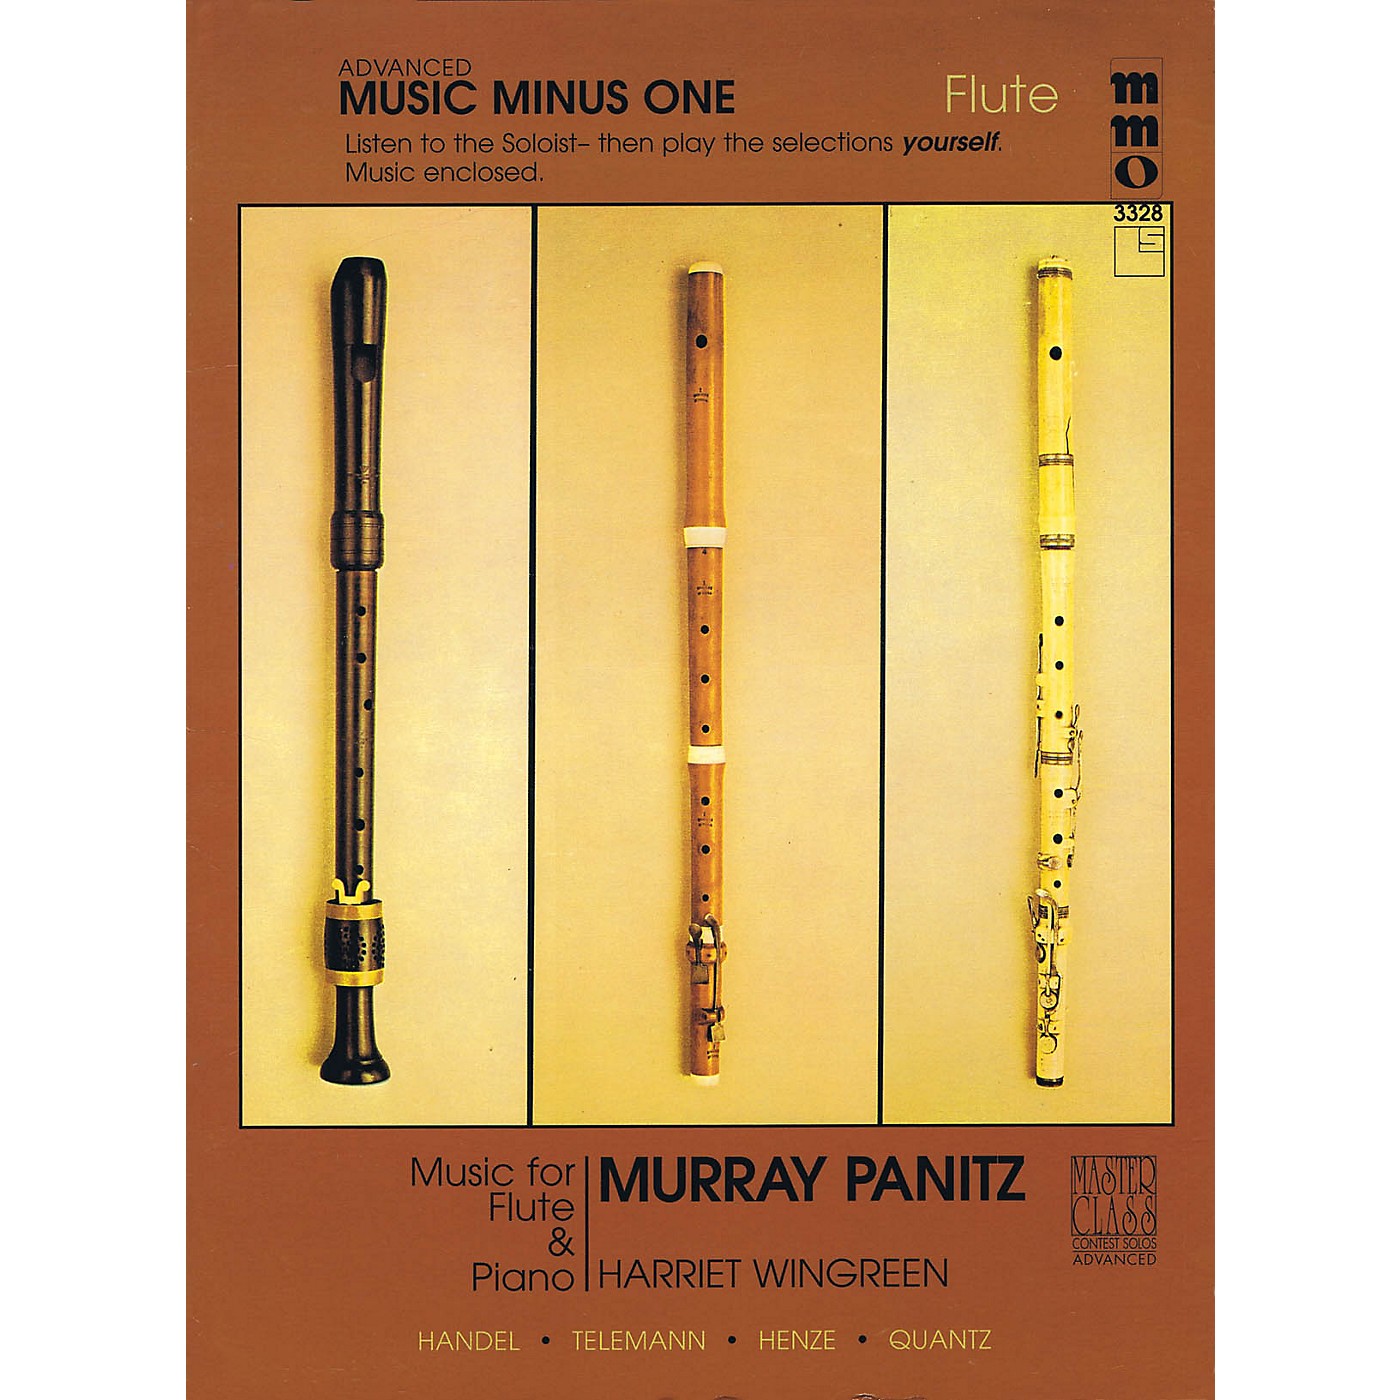 Music Minus One Advanced Flute Solos - Volume 3 Music Minus One Series Softcover with CD Performed by Murray Panitz thumbnail